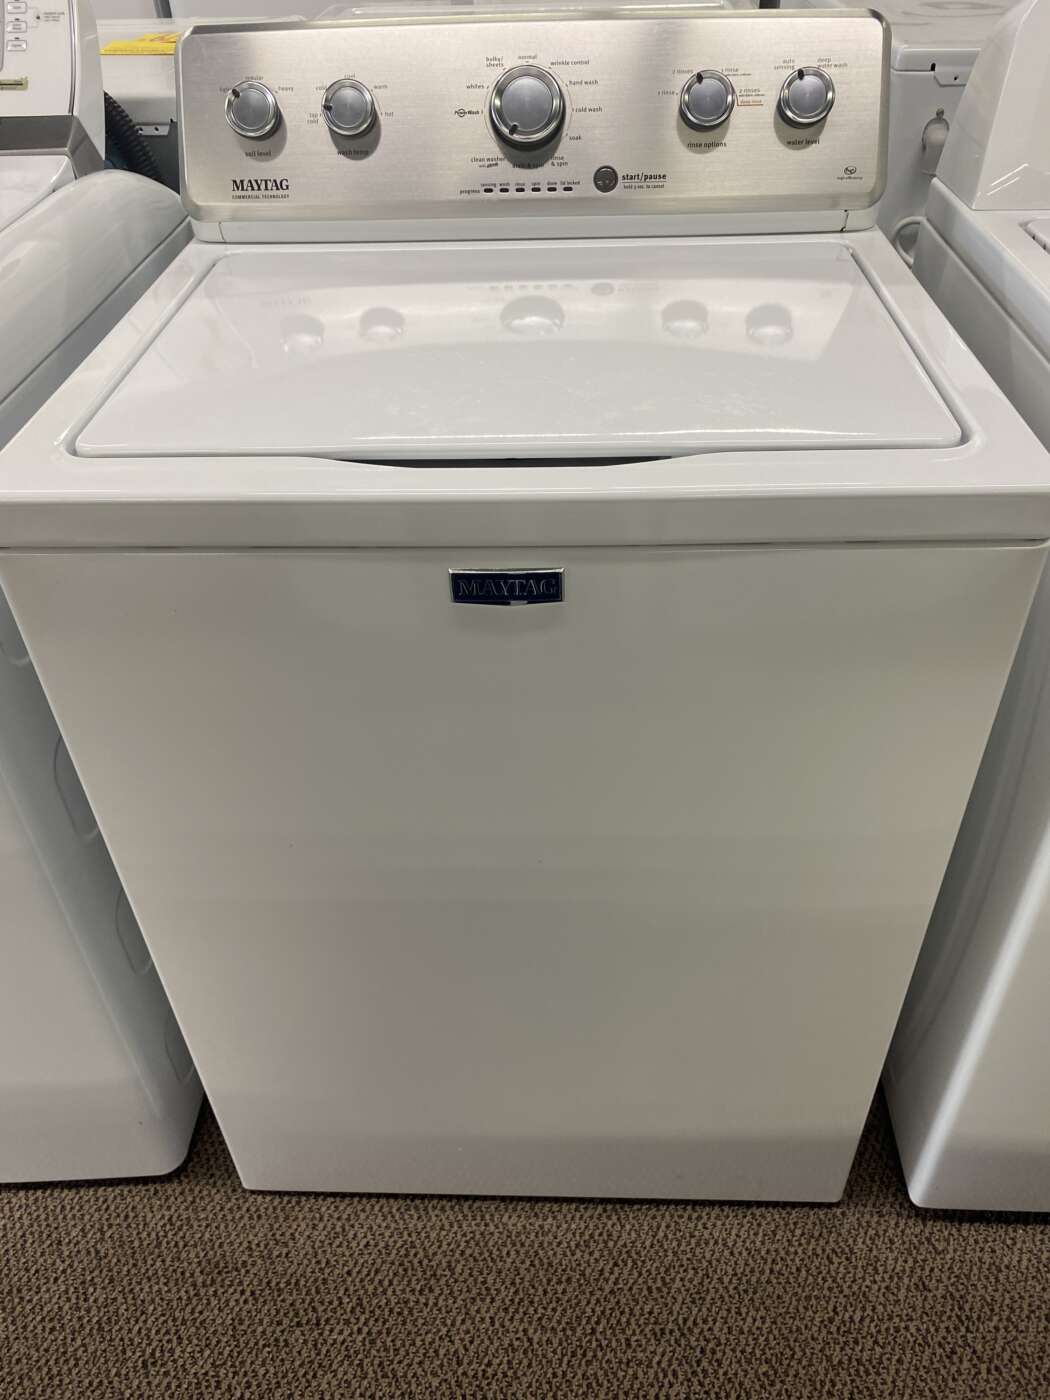 Reconditioned MAYTAG 4.2 Cu. Ft. Top load Washer